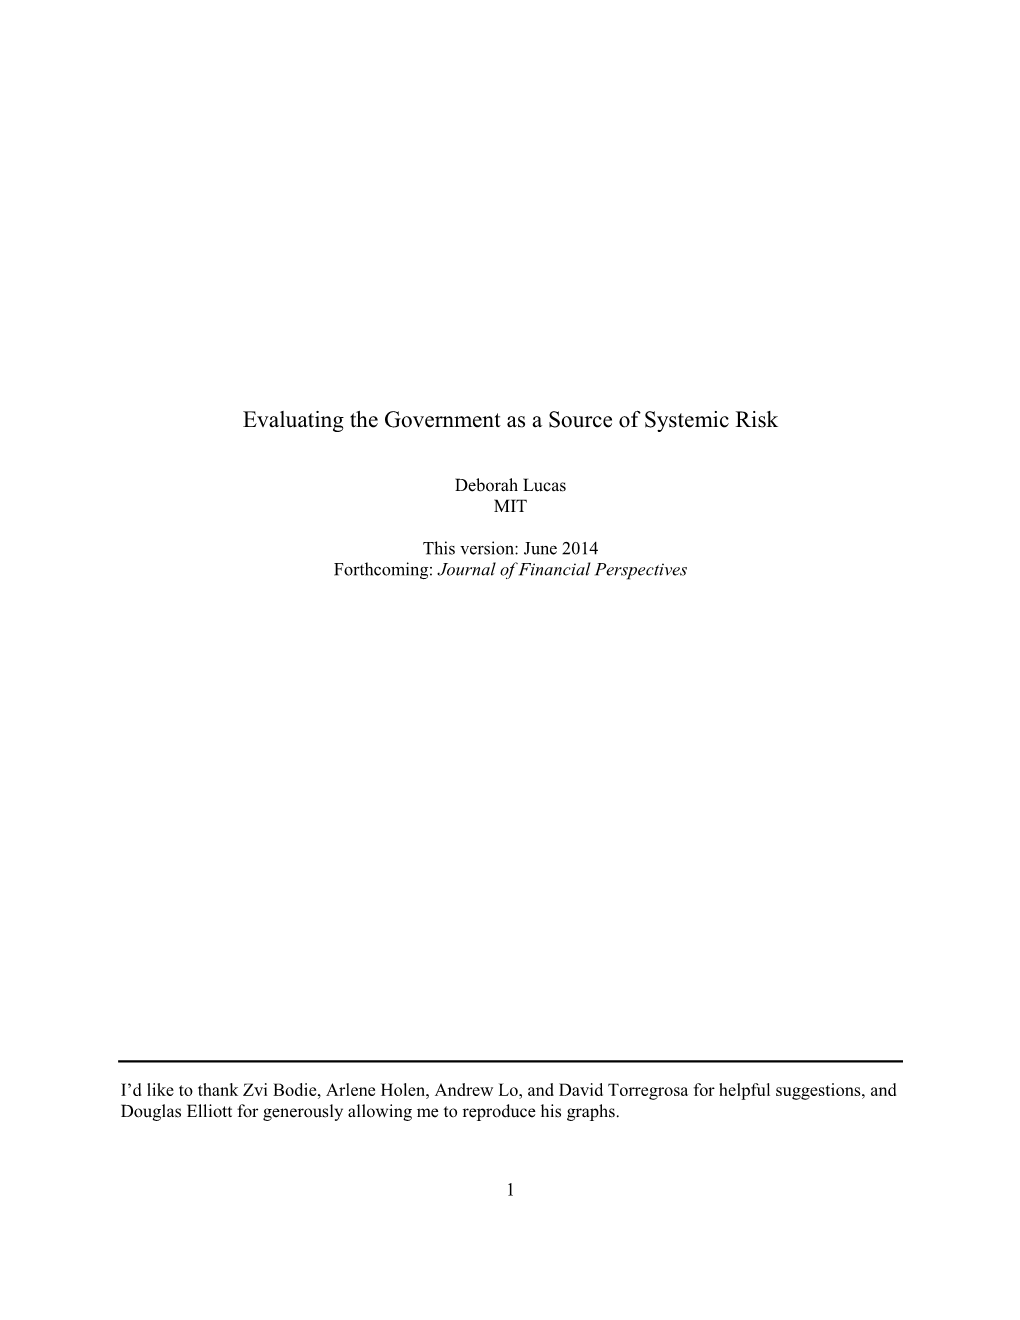 Evaluating the Government As a Source of Systemic Risk